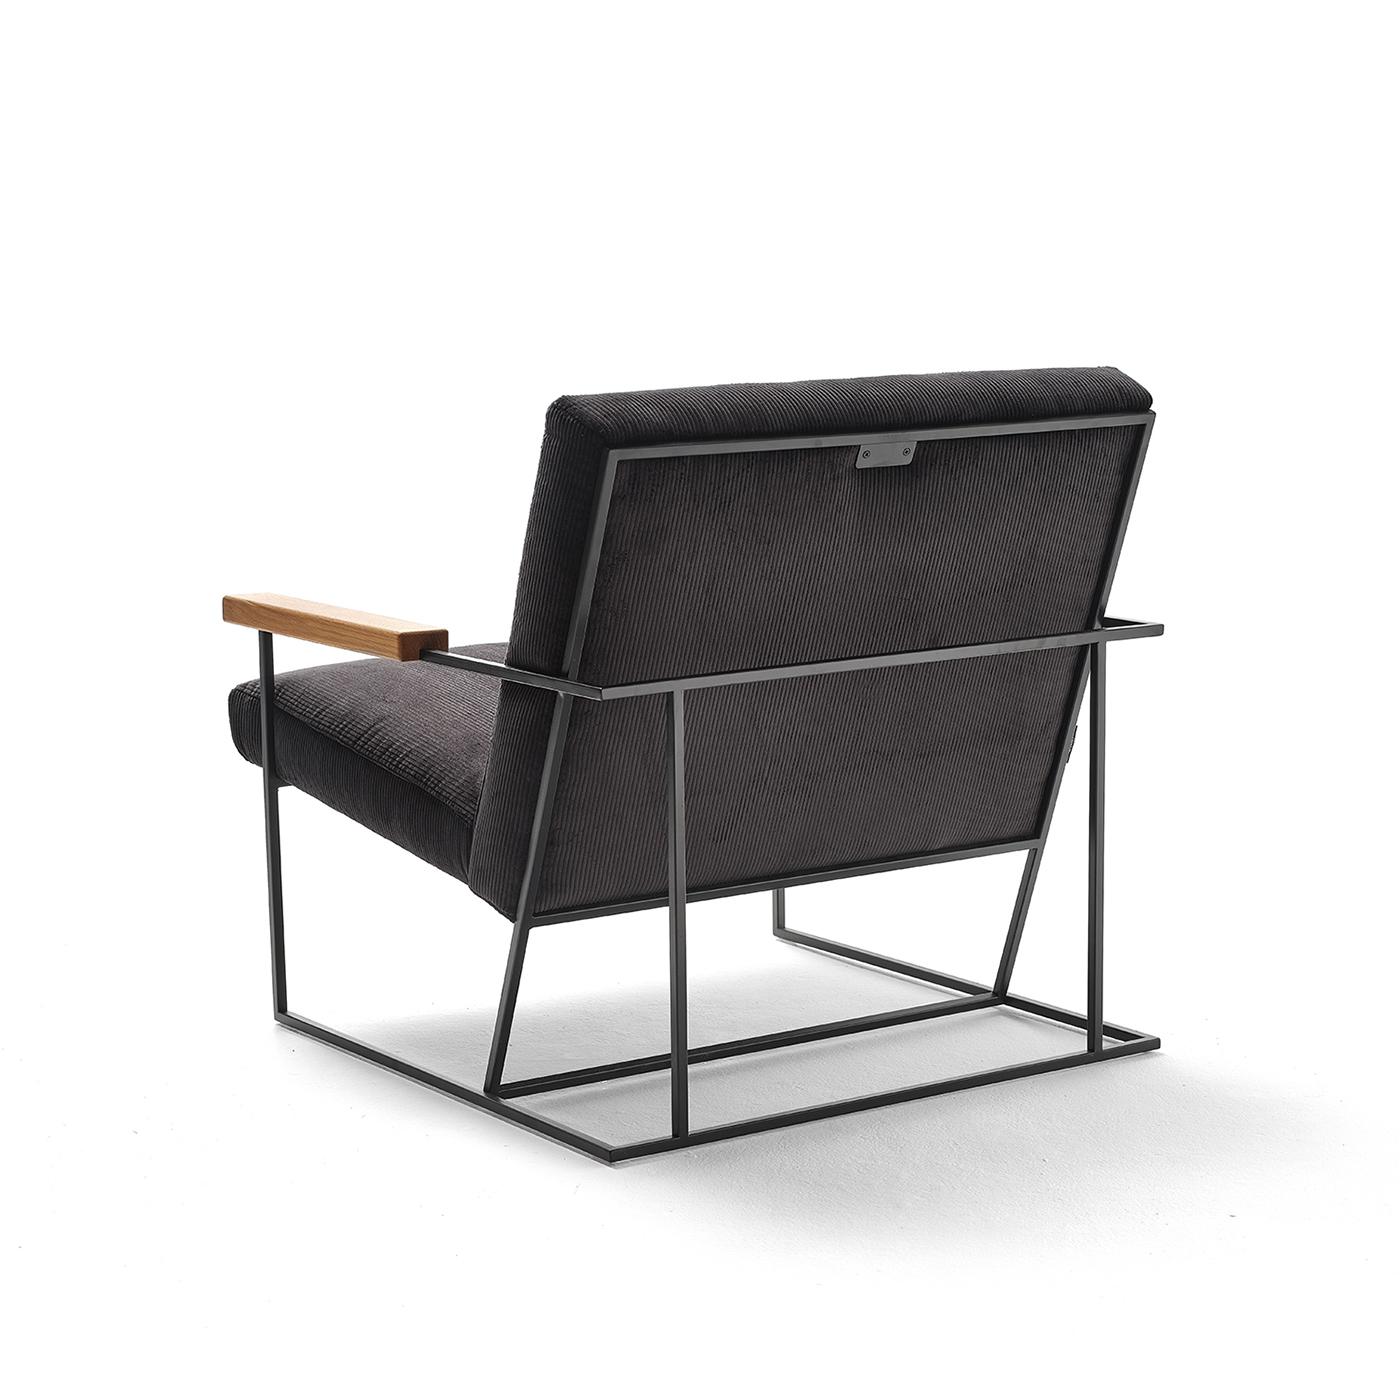 Perfectly balanced solids and voids masterfully define the elegant aesthetic of this armchair. Raised on a thin and graceful base in black-lacquered steel, the wide and welcoming seat is flanked by two sleek armrests in solid oak which extend to